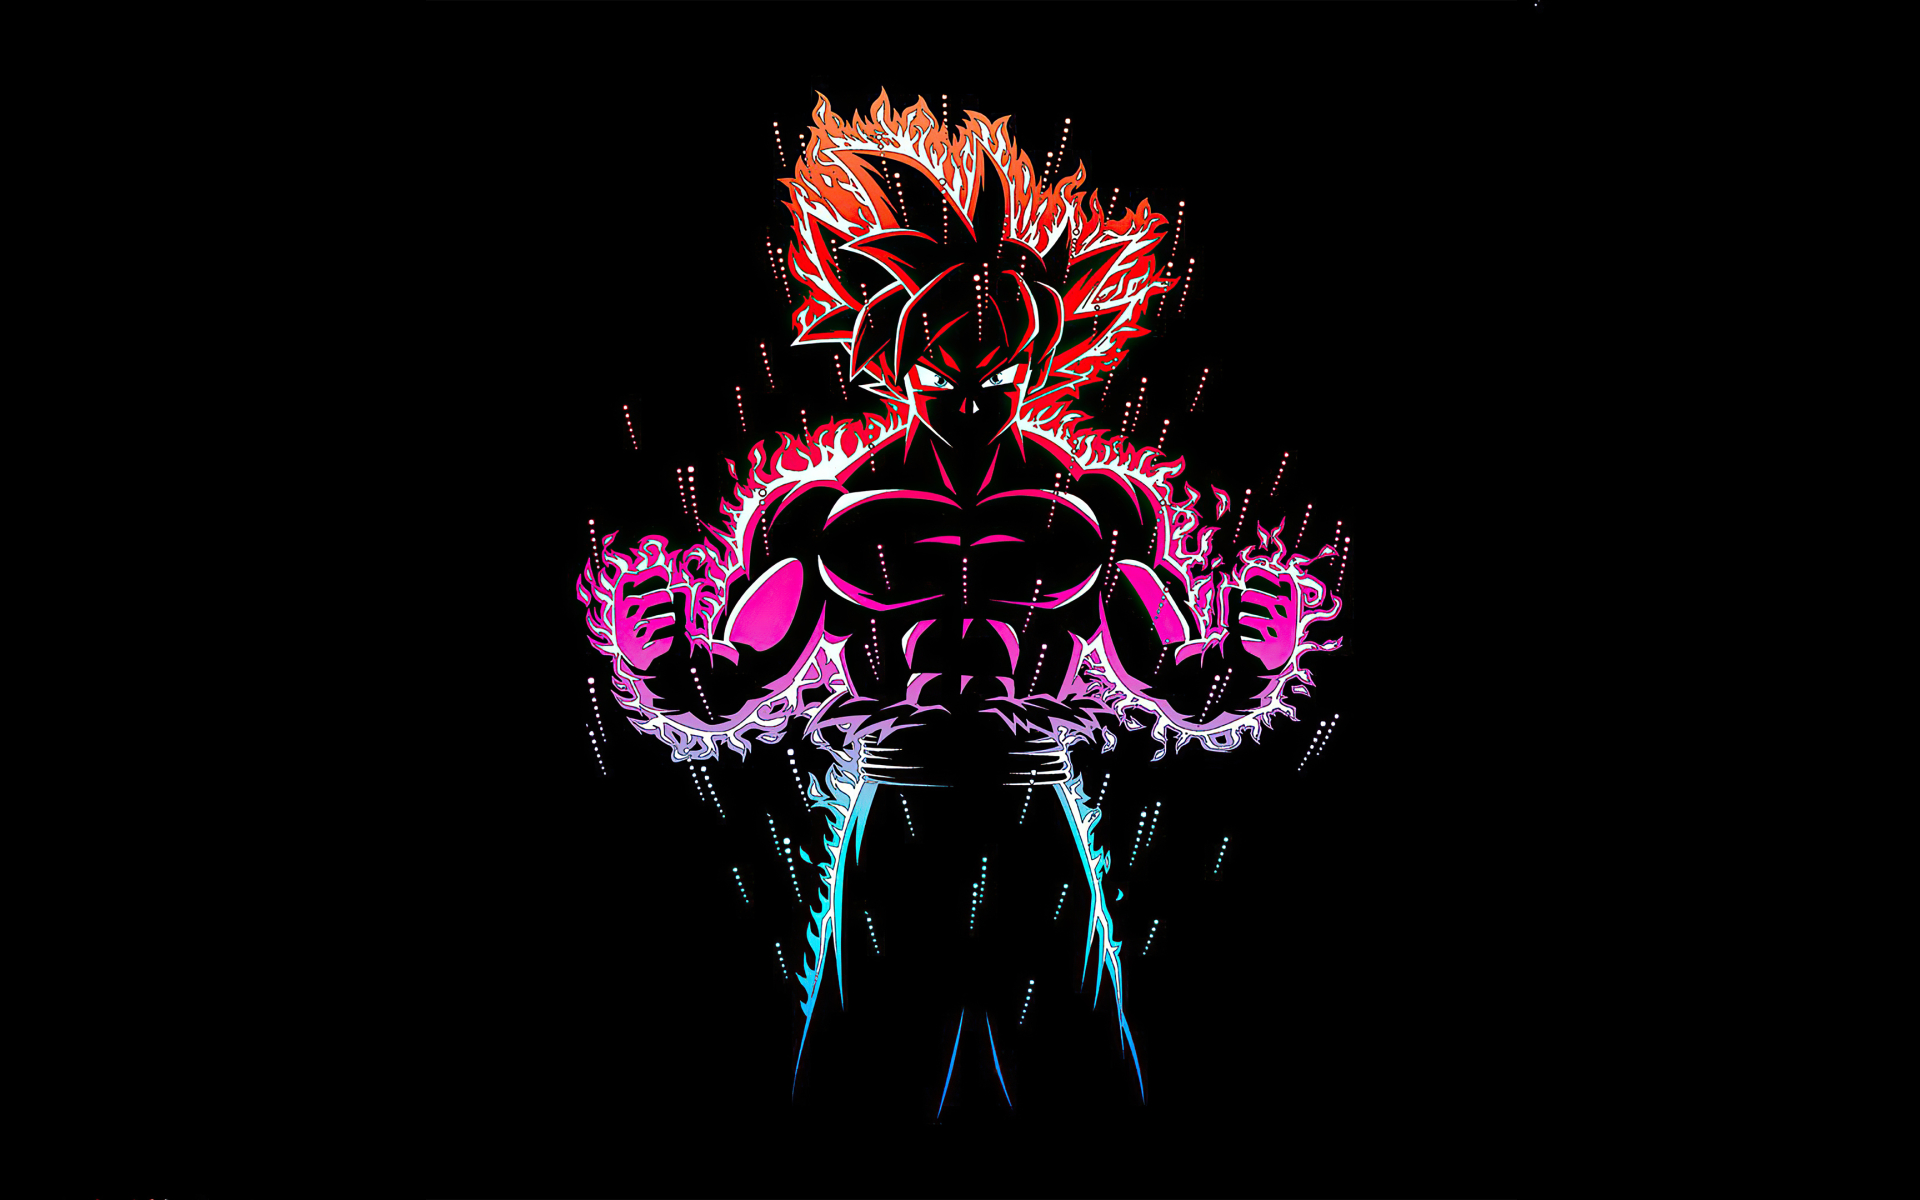 Download Goku wallpaper by LukasCAI  692d  Free on ZEDGE now Browse  millions of popular blue Wa  Dragon ball art goku Goku wallpaper Anime  dragon ball super